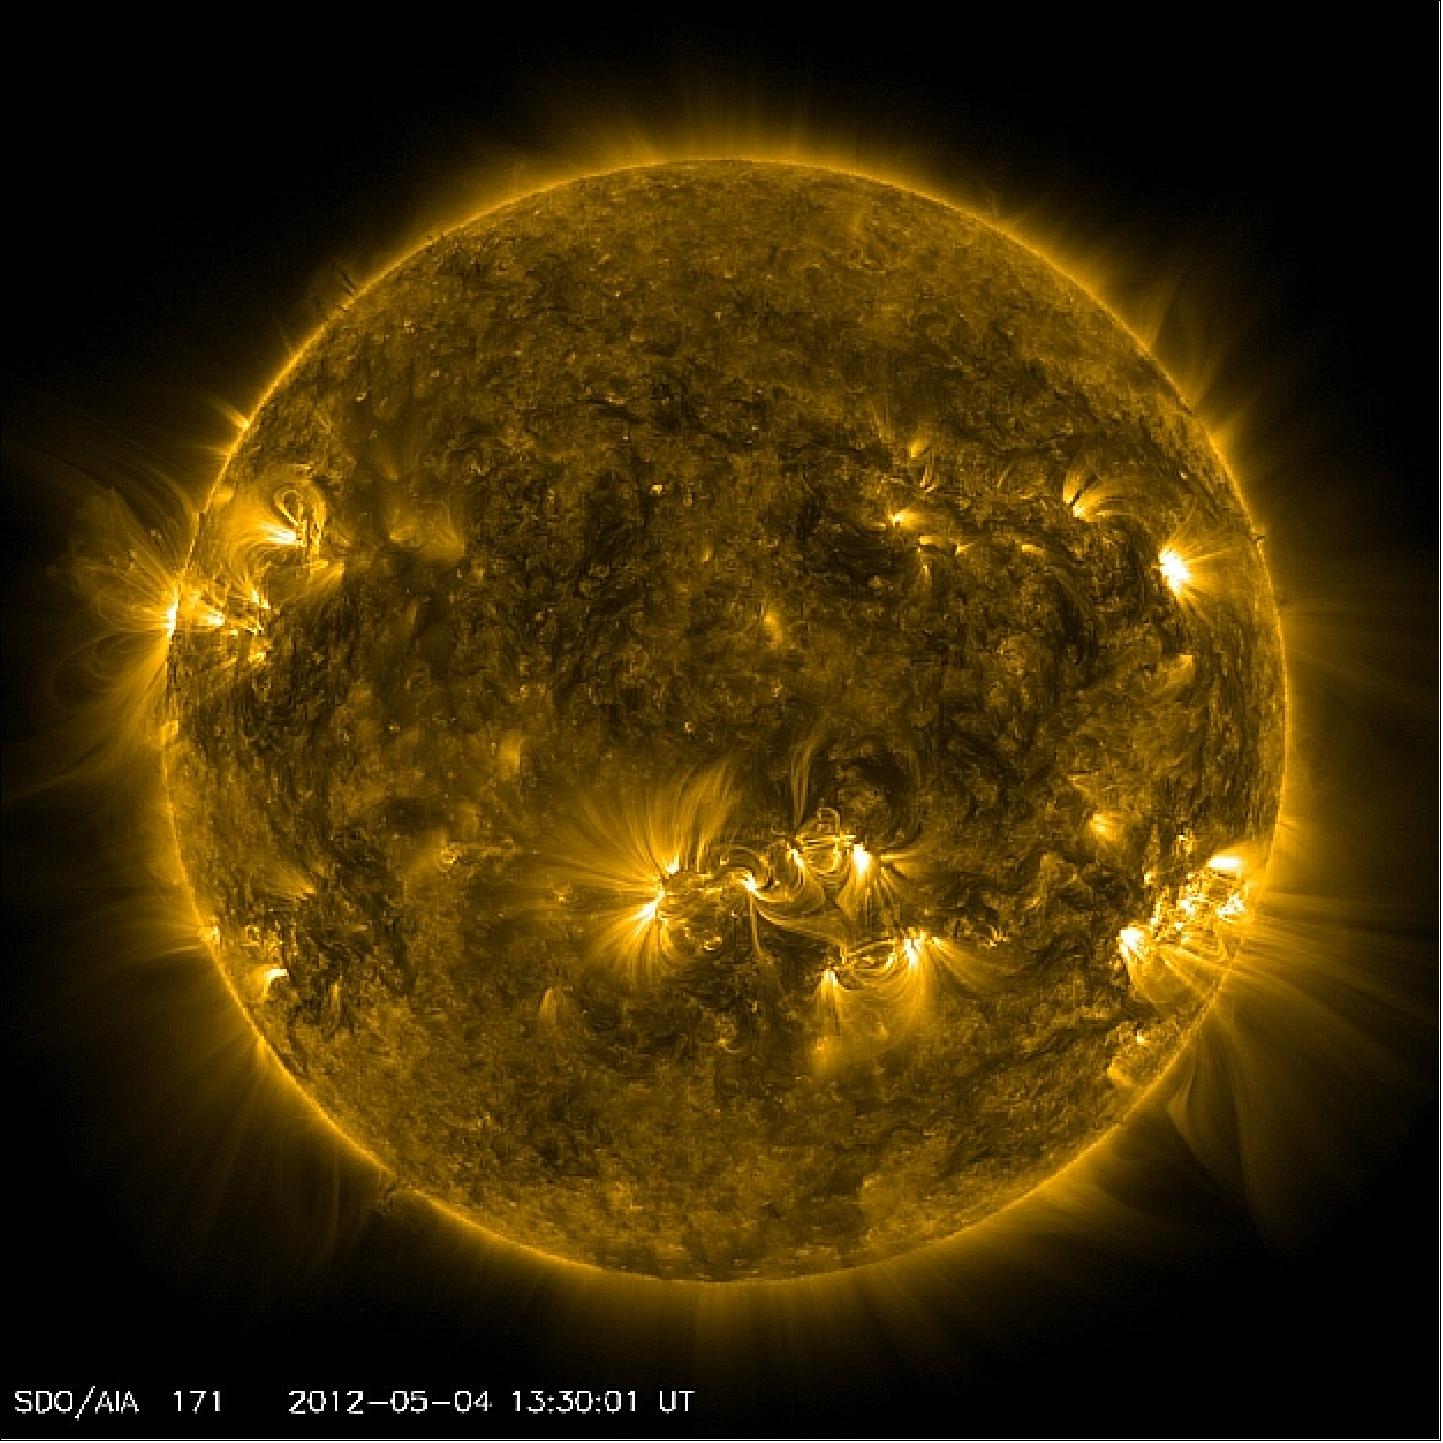 Figure 33: AIA instrument image observed at 171 Ä showing the current conditions of the quiet corona and upper transition region of the Sun (image credit: NASA) 43)